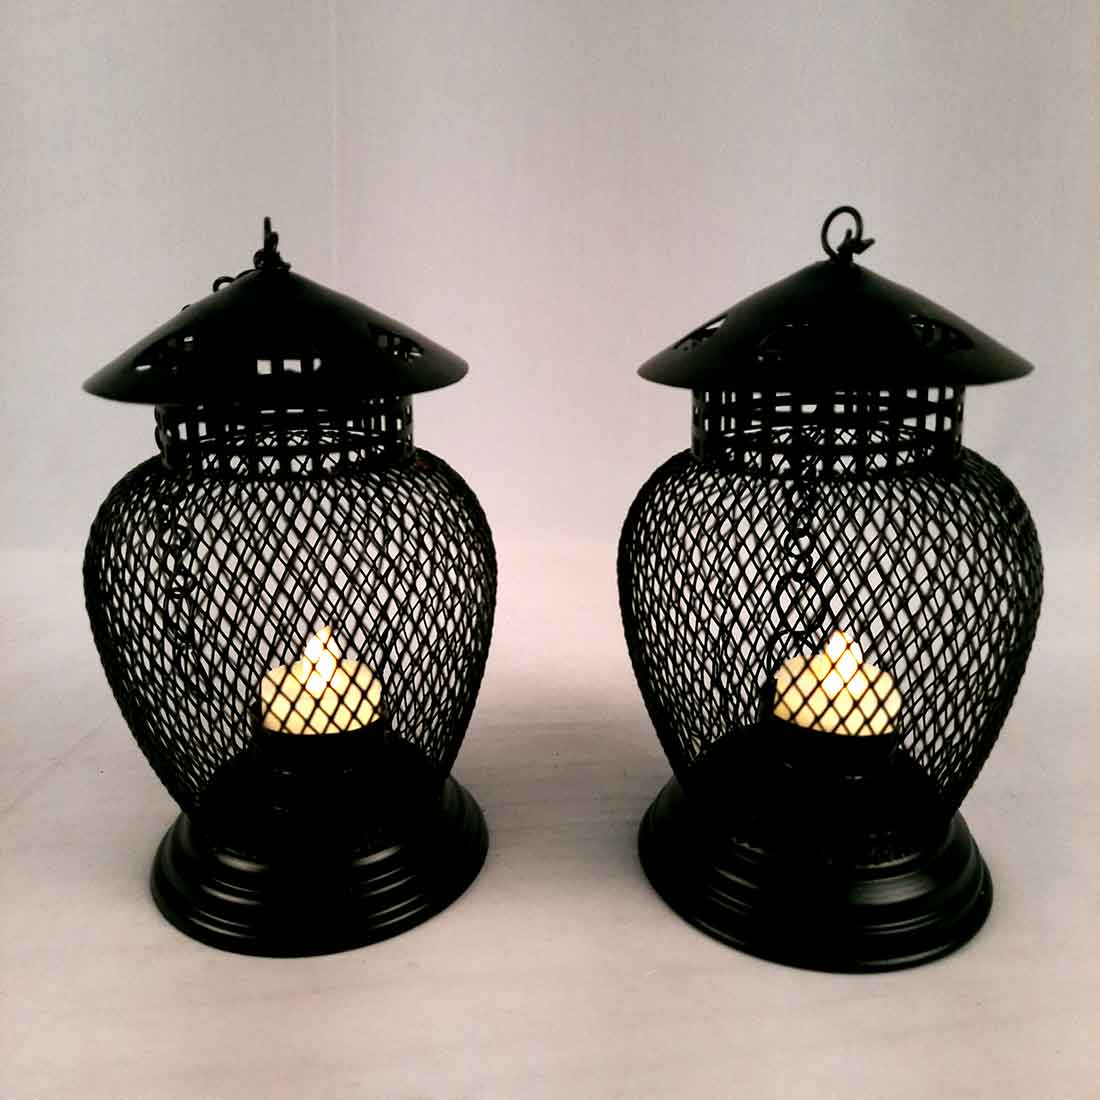 TeaLight Holder Hanging | Candle Holders Stand Wall Mount | Tea Light Candle Stands - Metal - For Home, Table, Living Room, Dining room, Bedroom Decor | For Festival Decoration & Gifts -Set of 2